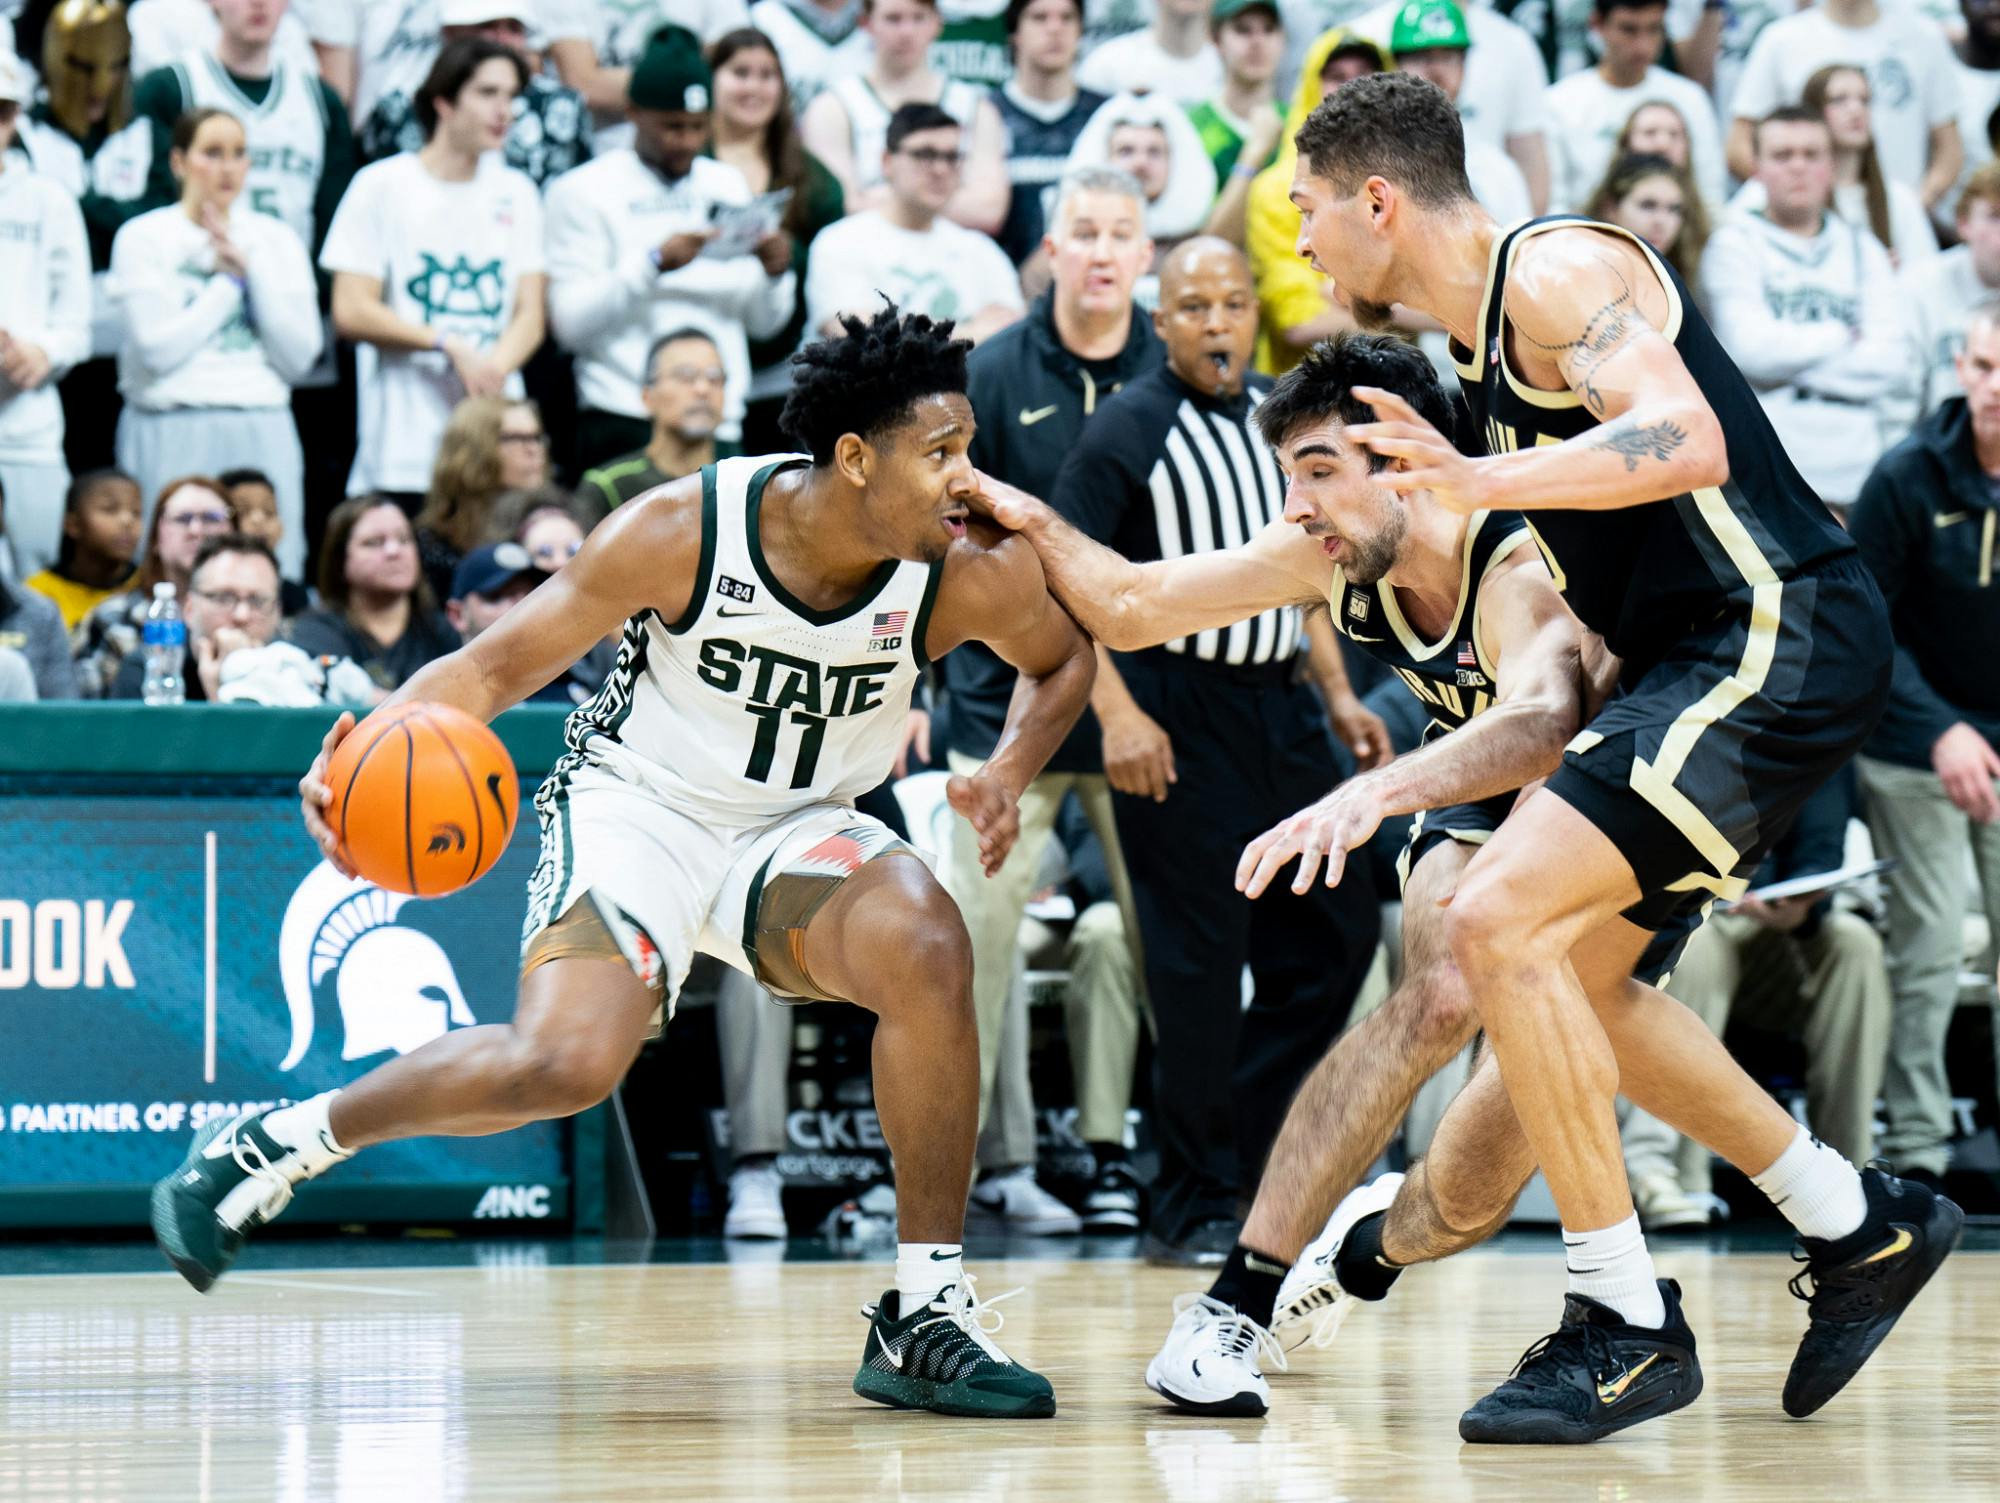 <p>Junior guard AJ Hoggard (11) tries to get past Purdue University player during a game at Breslin Center on Jan. 16, 2023. The Spartans fell to the Boilermakers with a score of 64-63. </p>